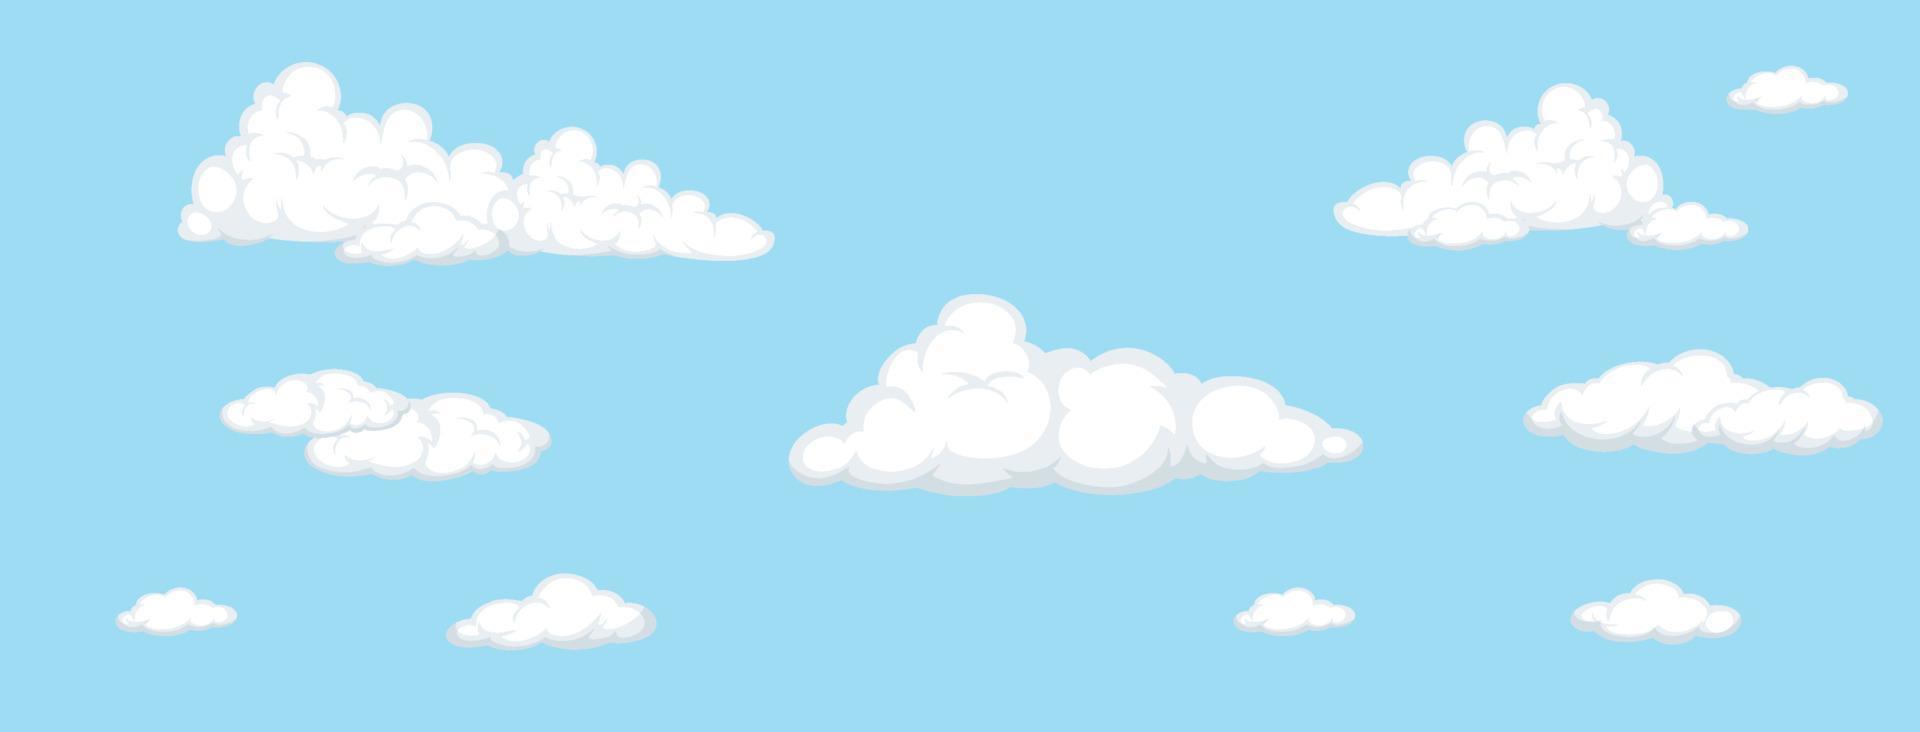 Horizontal sky with cloud background vector